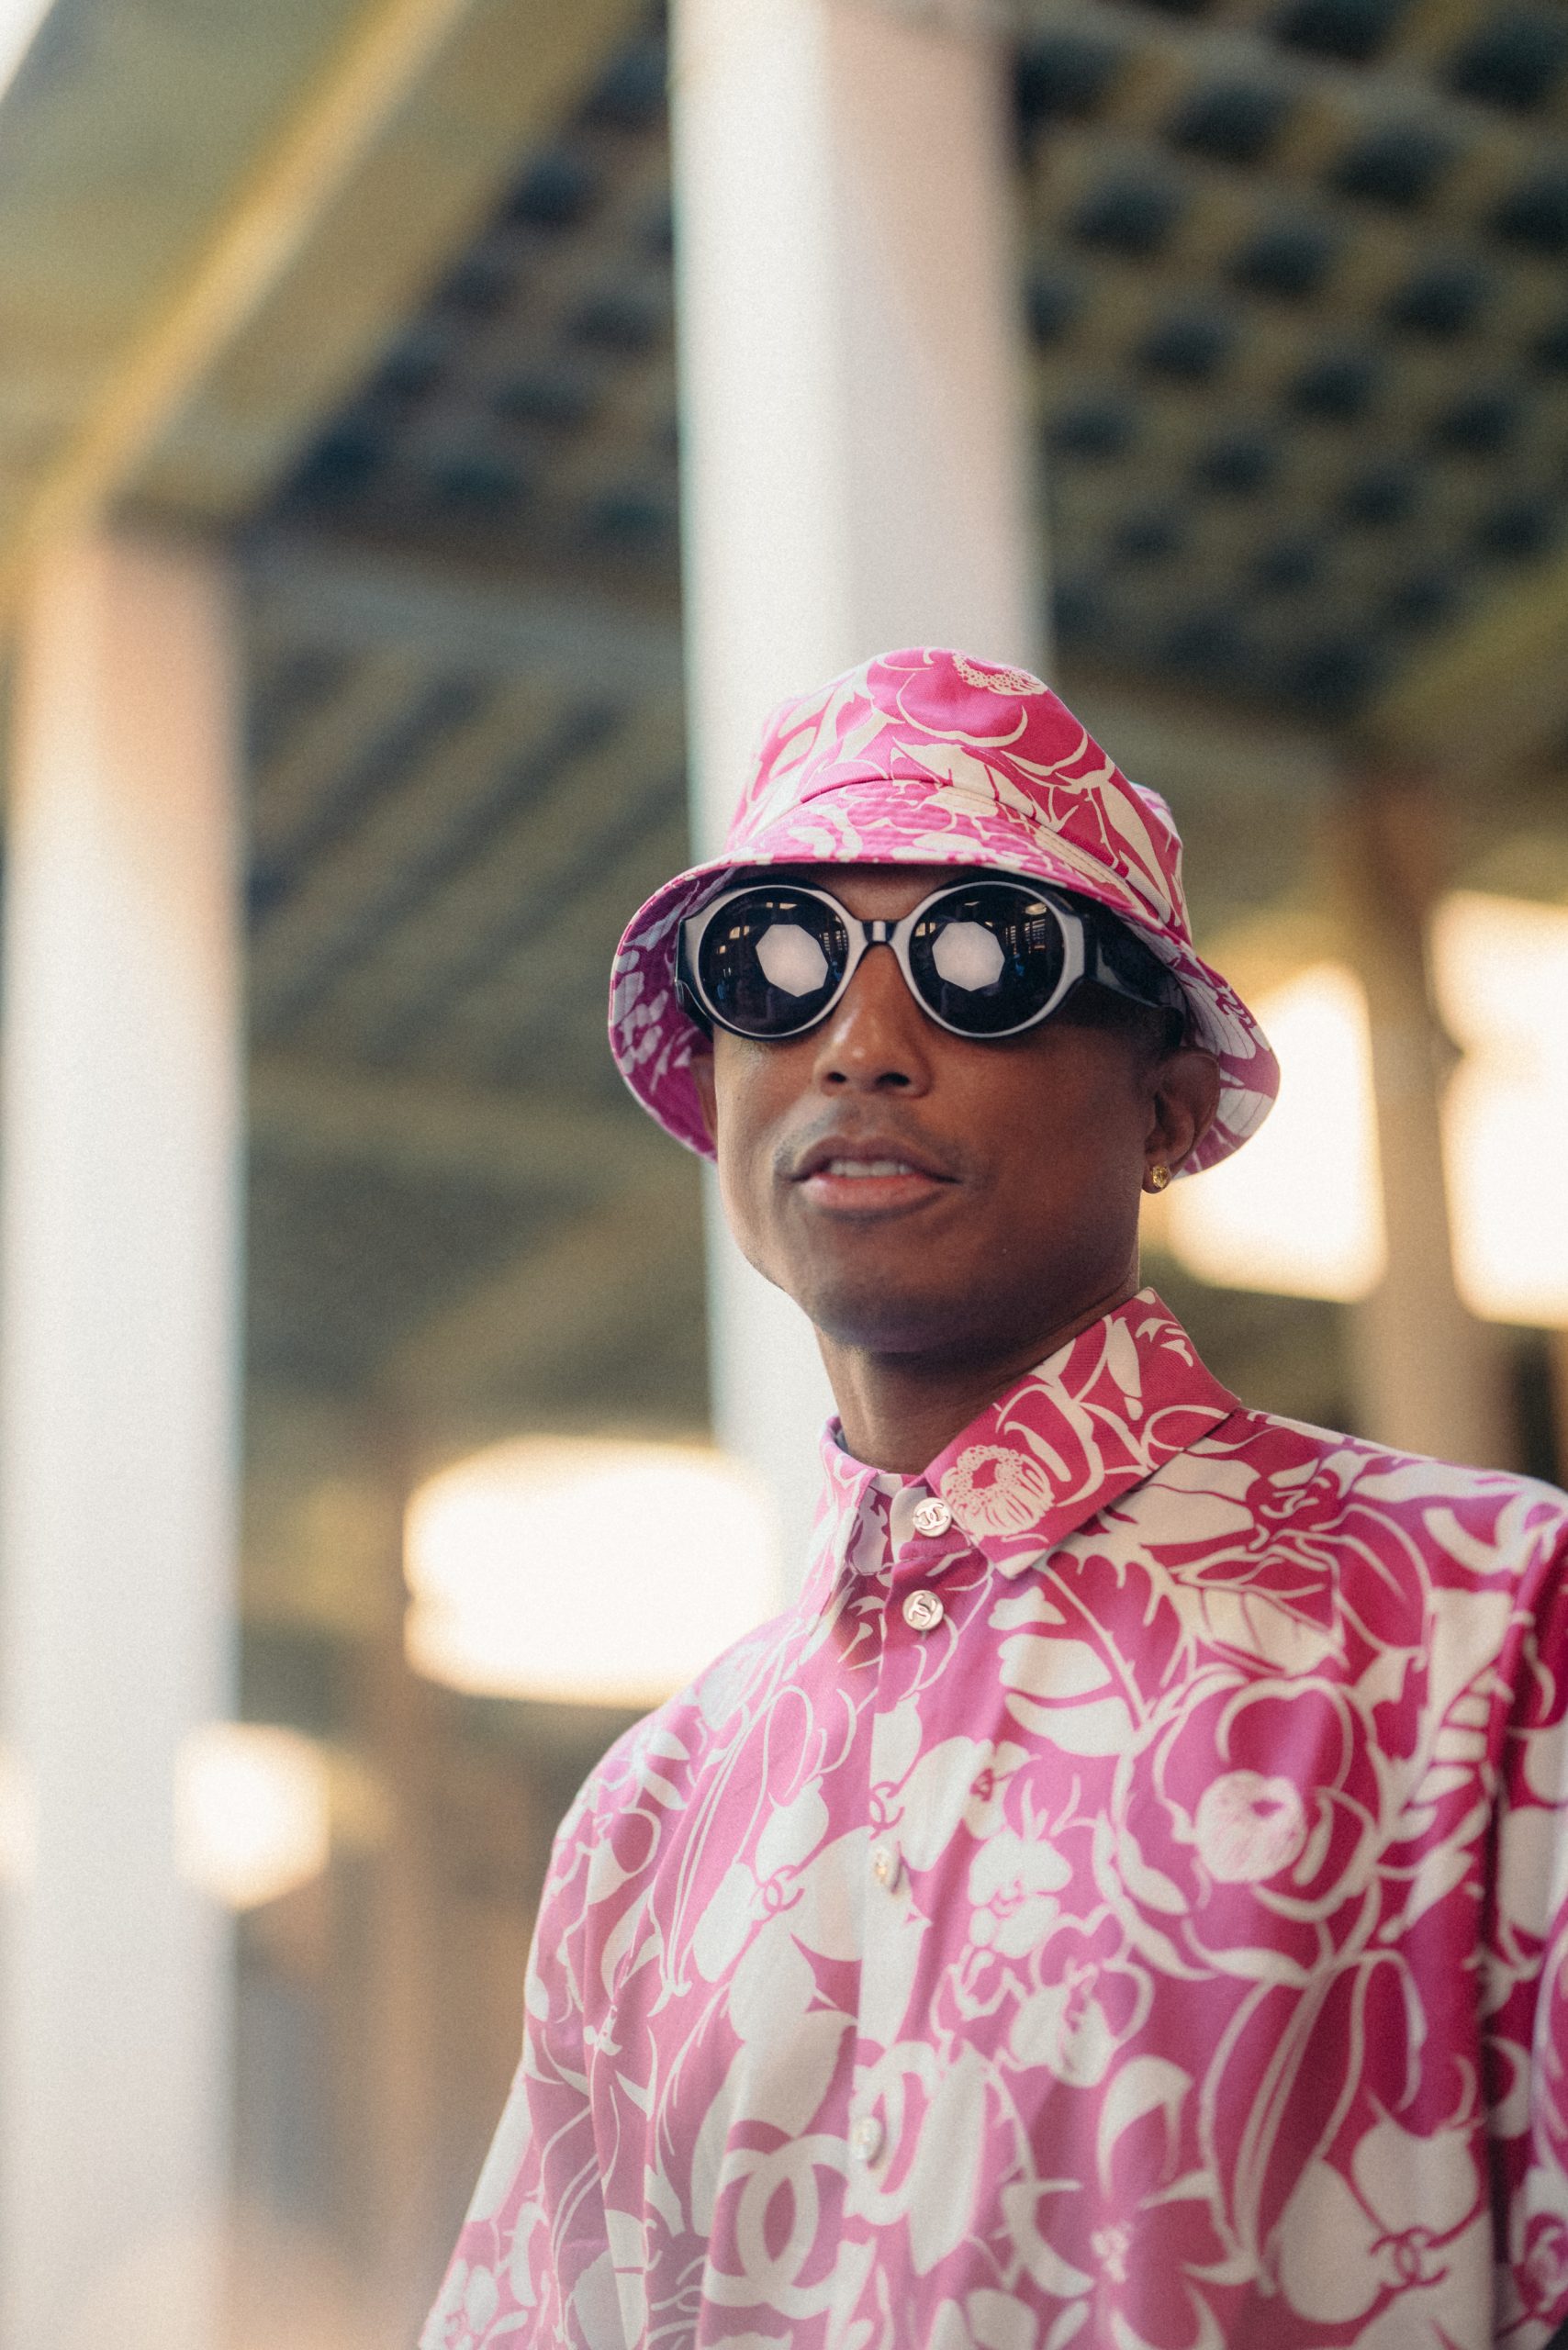 Pharrell Williams was the guest of honor at the Chanel Métiers d'Arts show